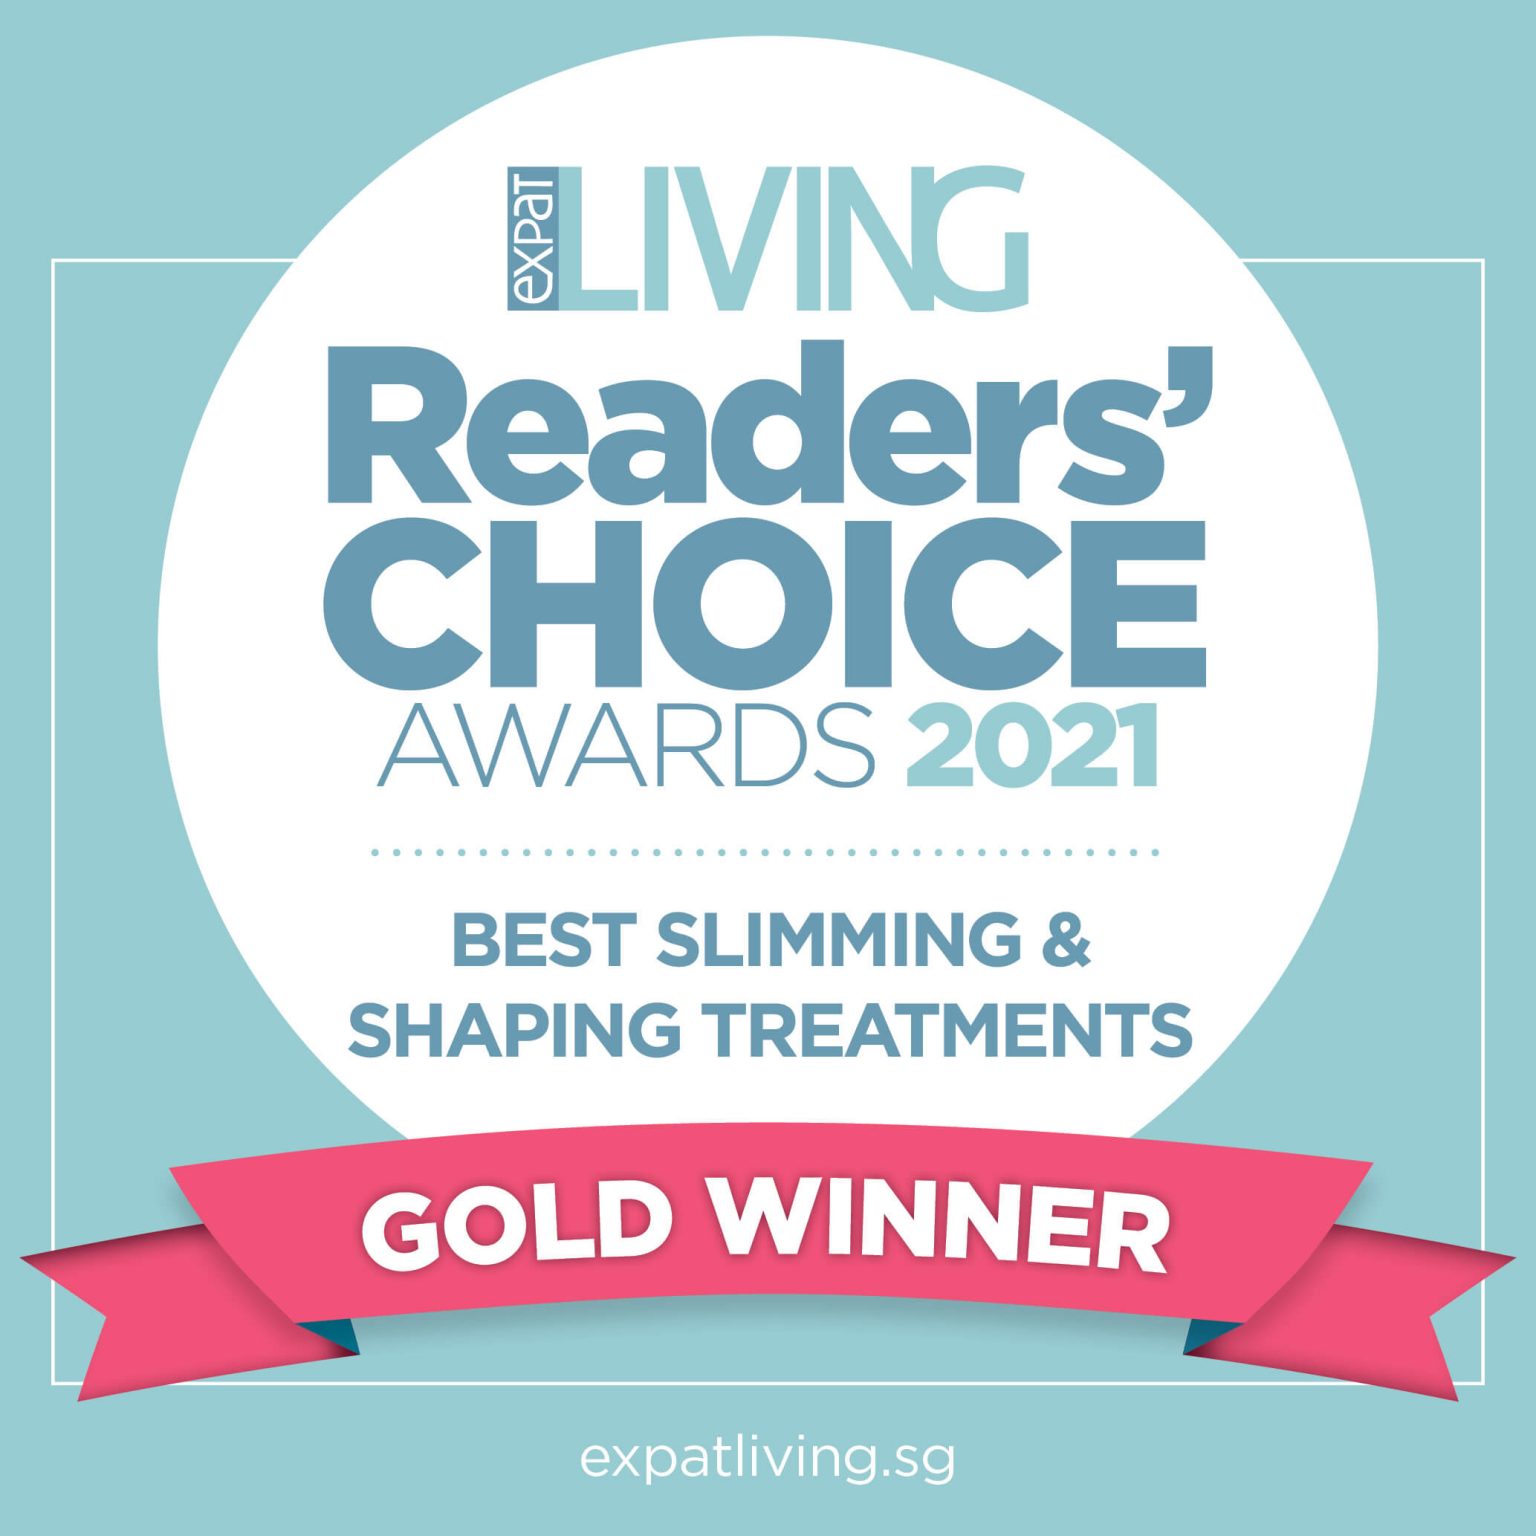 Cutis Wins Best Slimming and Shaping Treatments in EL’s Readers’ Choice Awards 2021